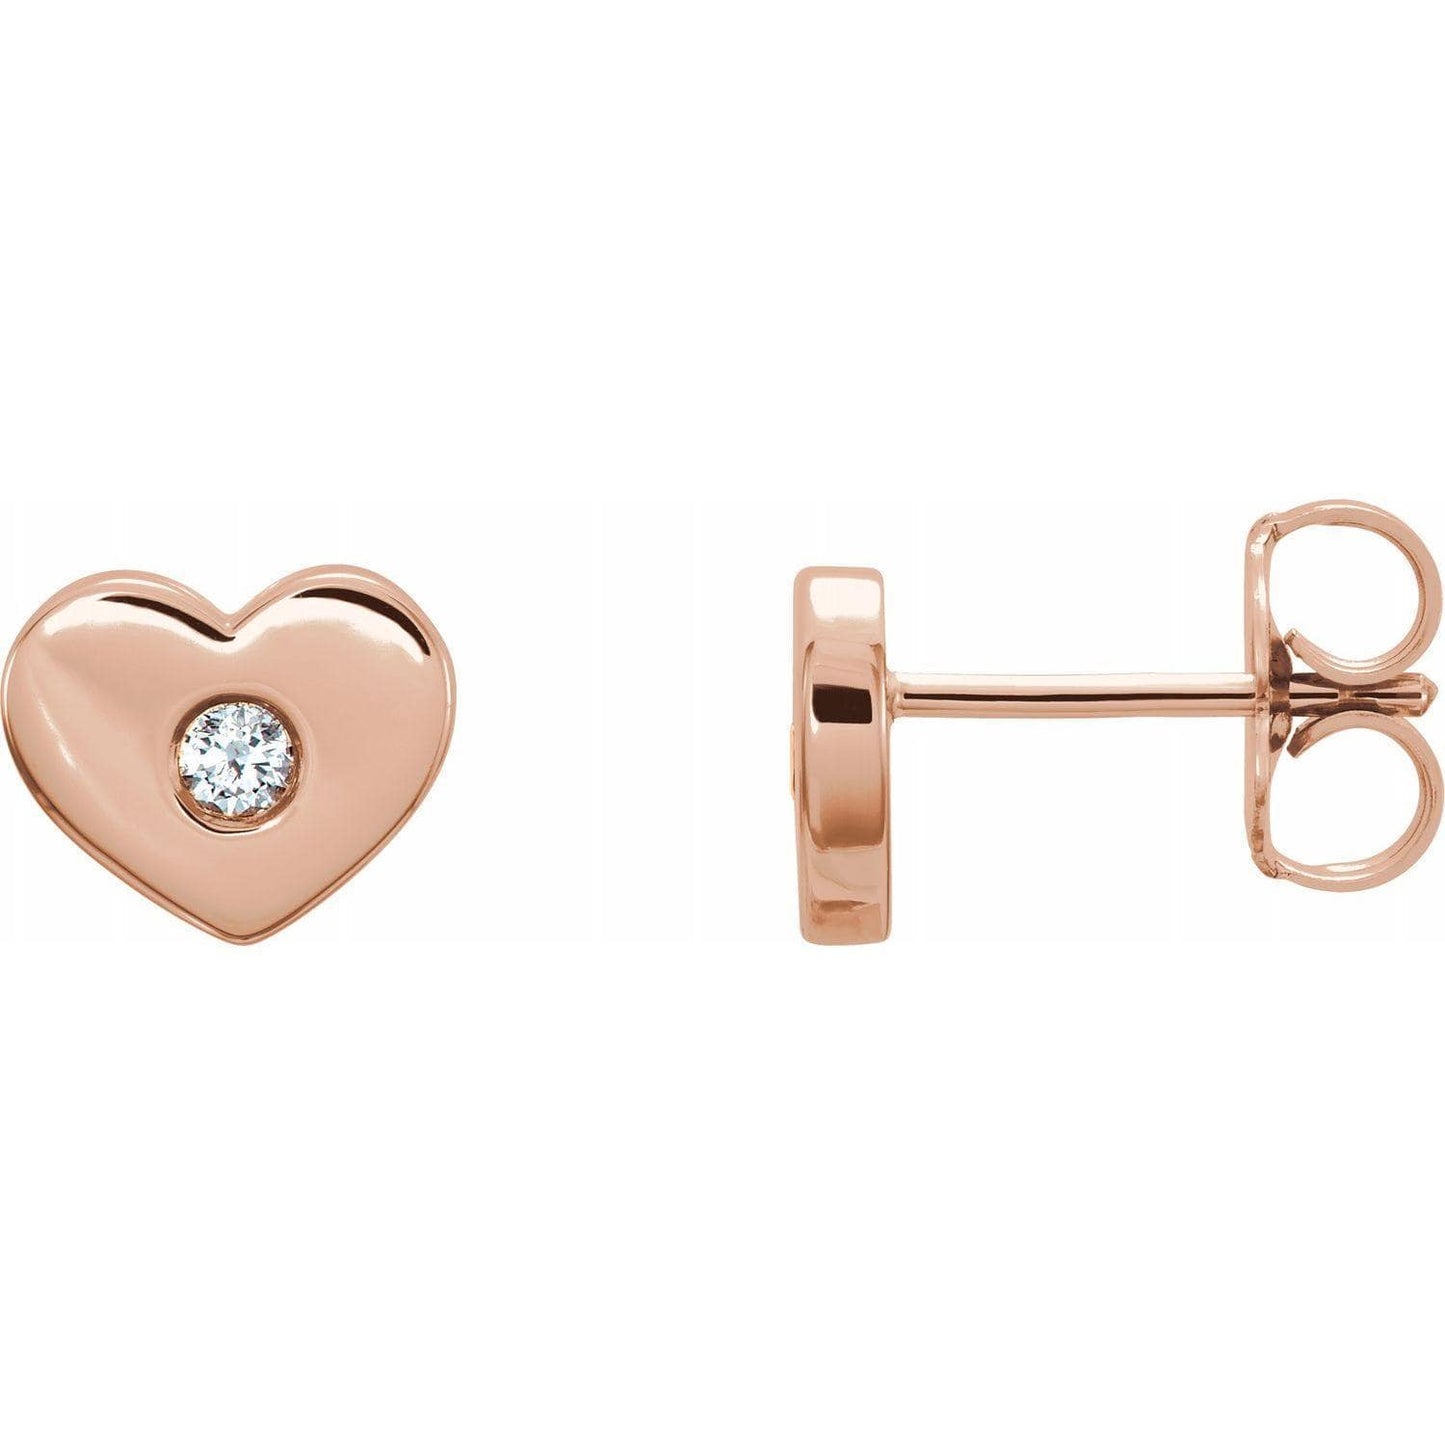 14k Gold Heart Stud Earring with Diamond Accent 14k Rose Gold Earrings by Nodeform